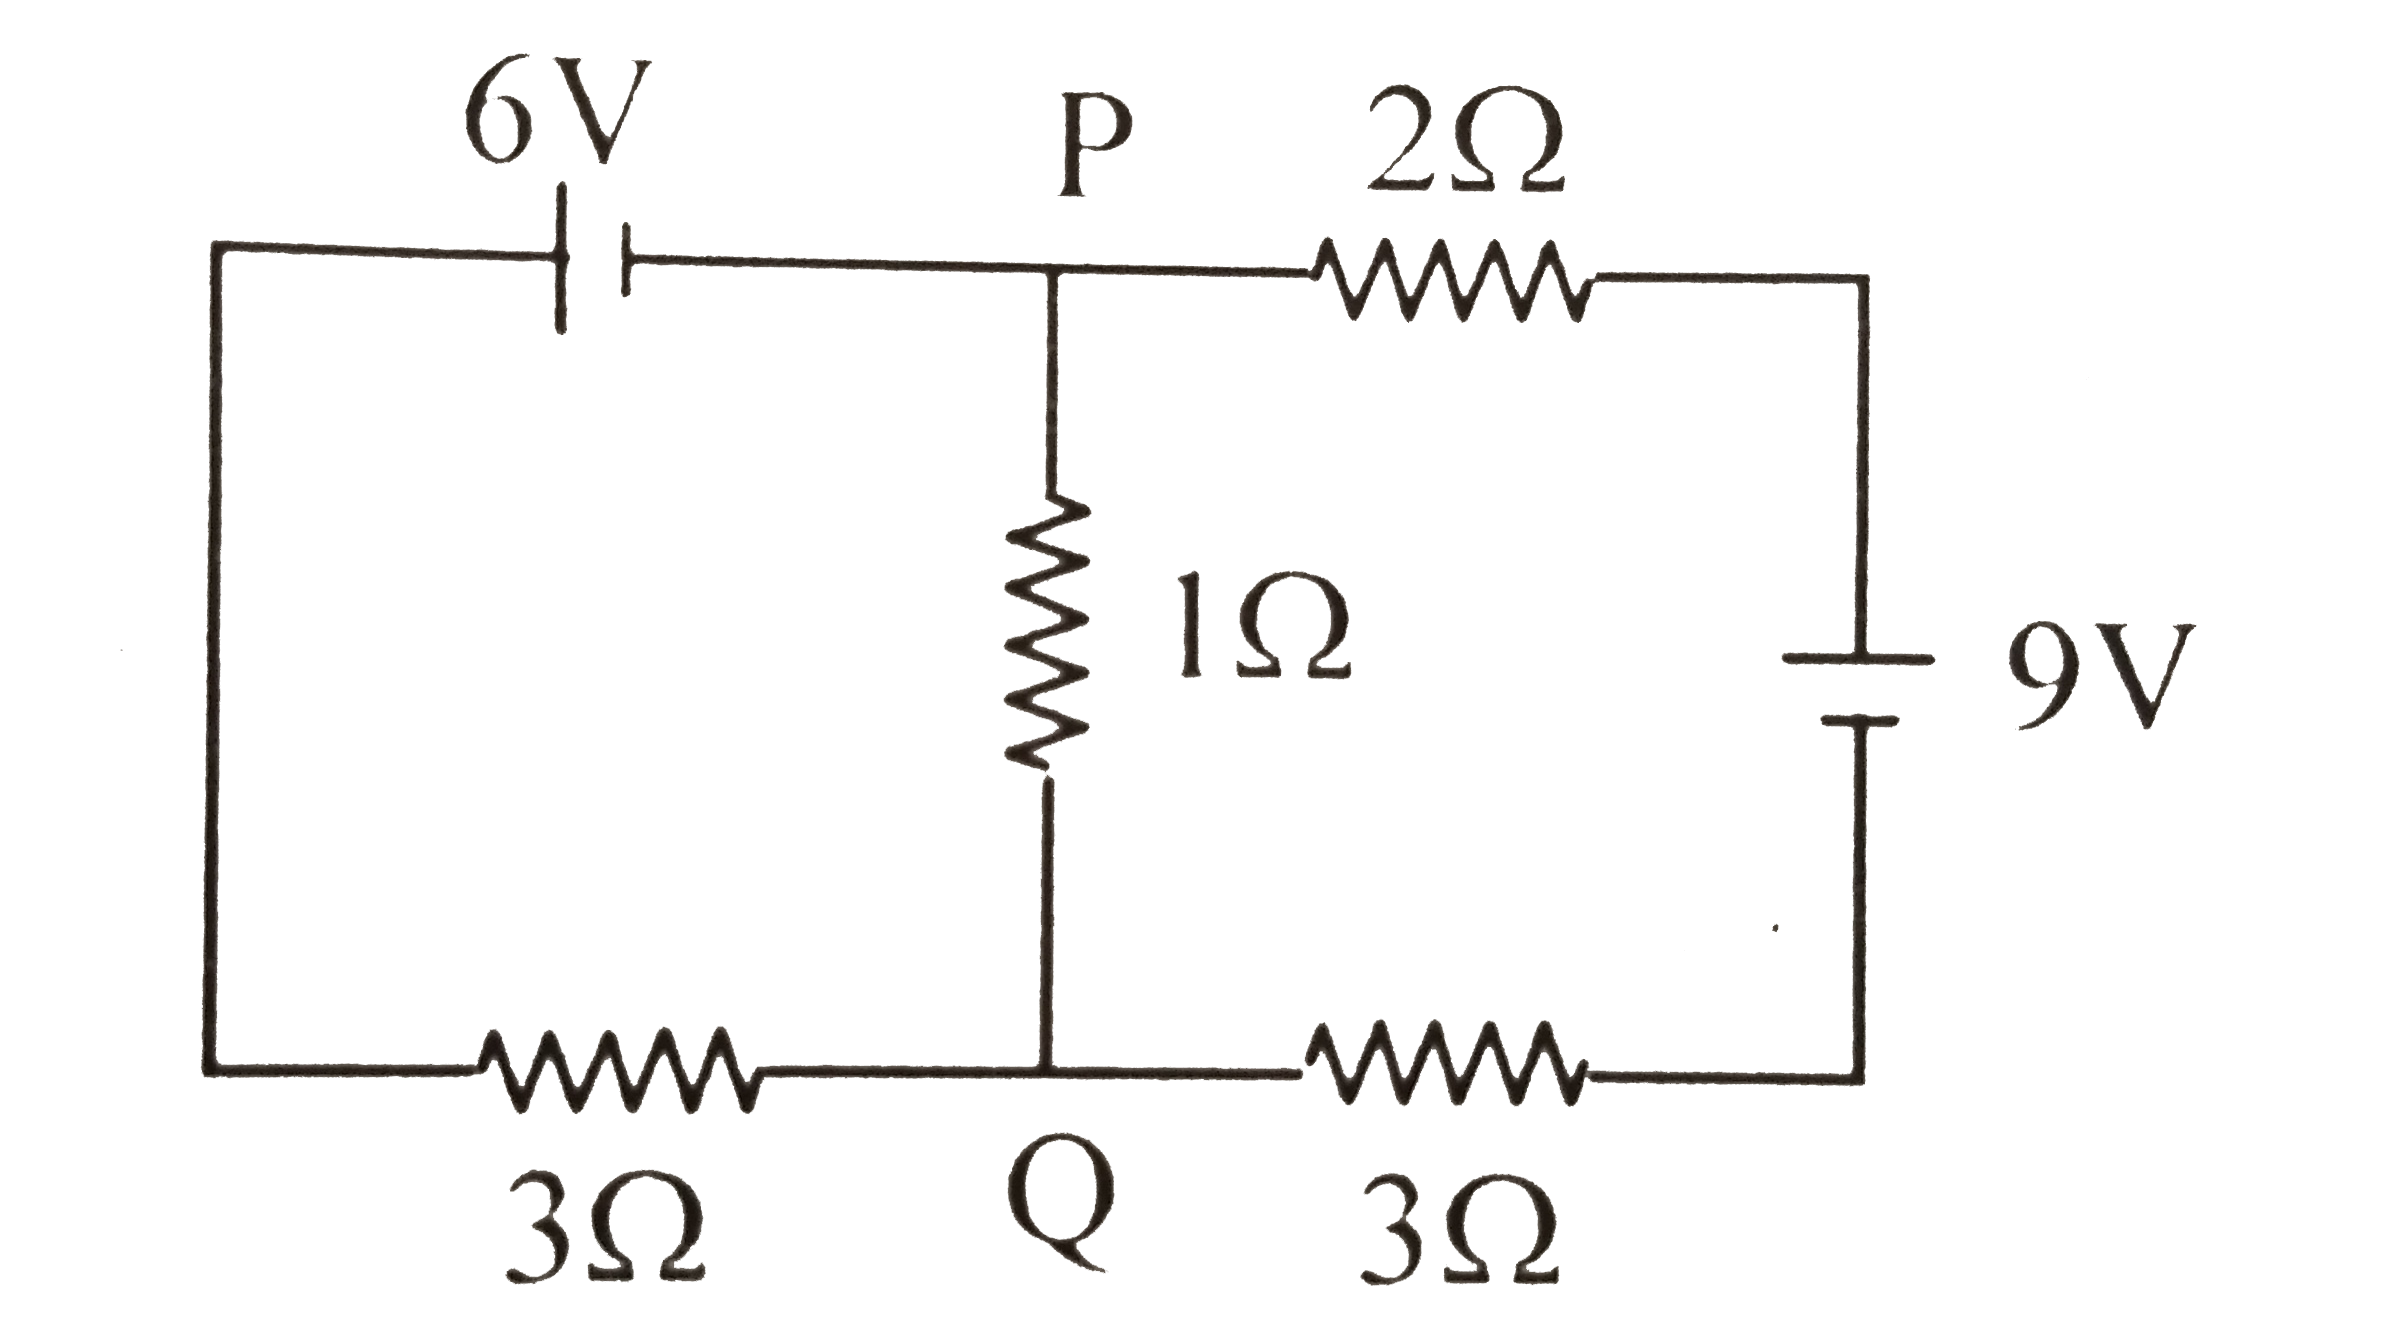 In the circuit shown, the current in the 1Omega resistor is :